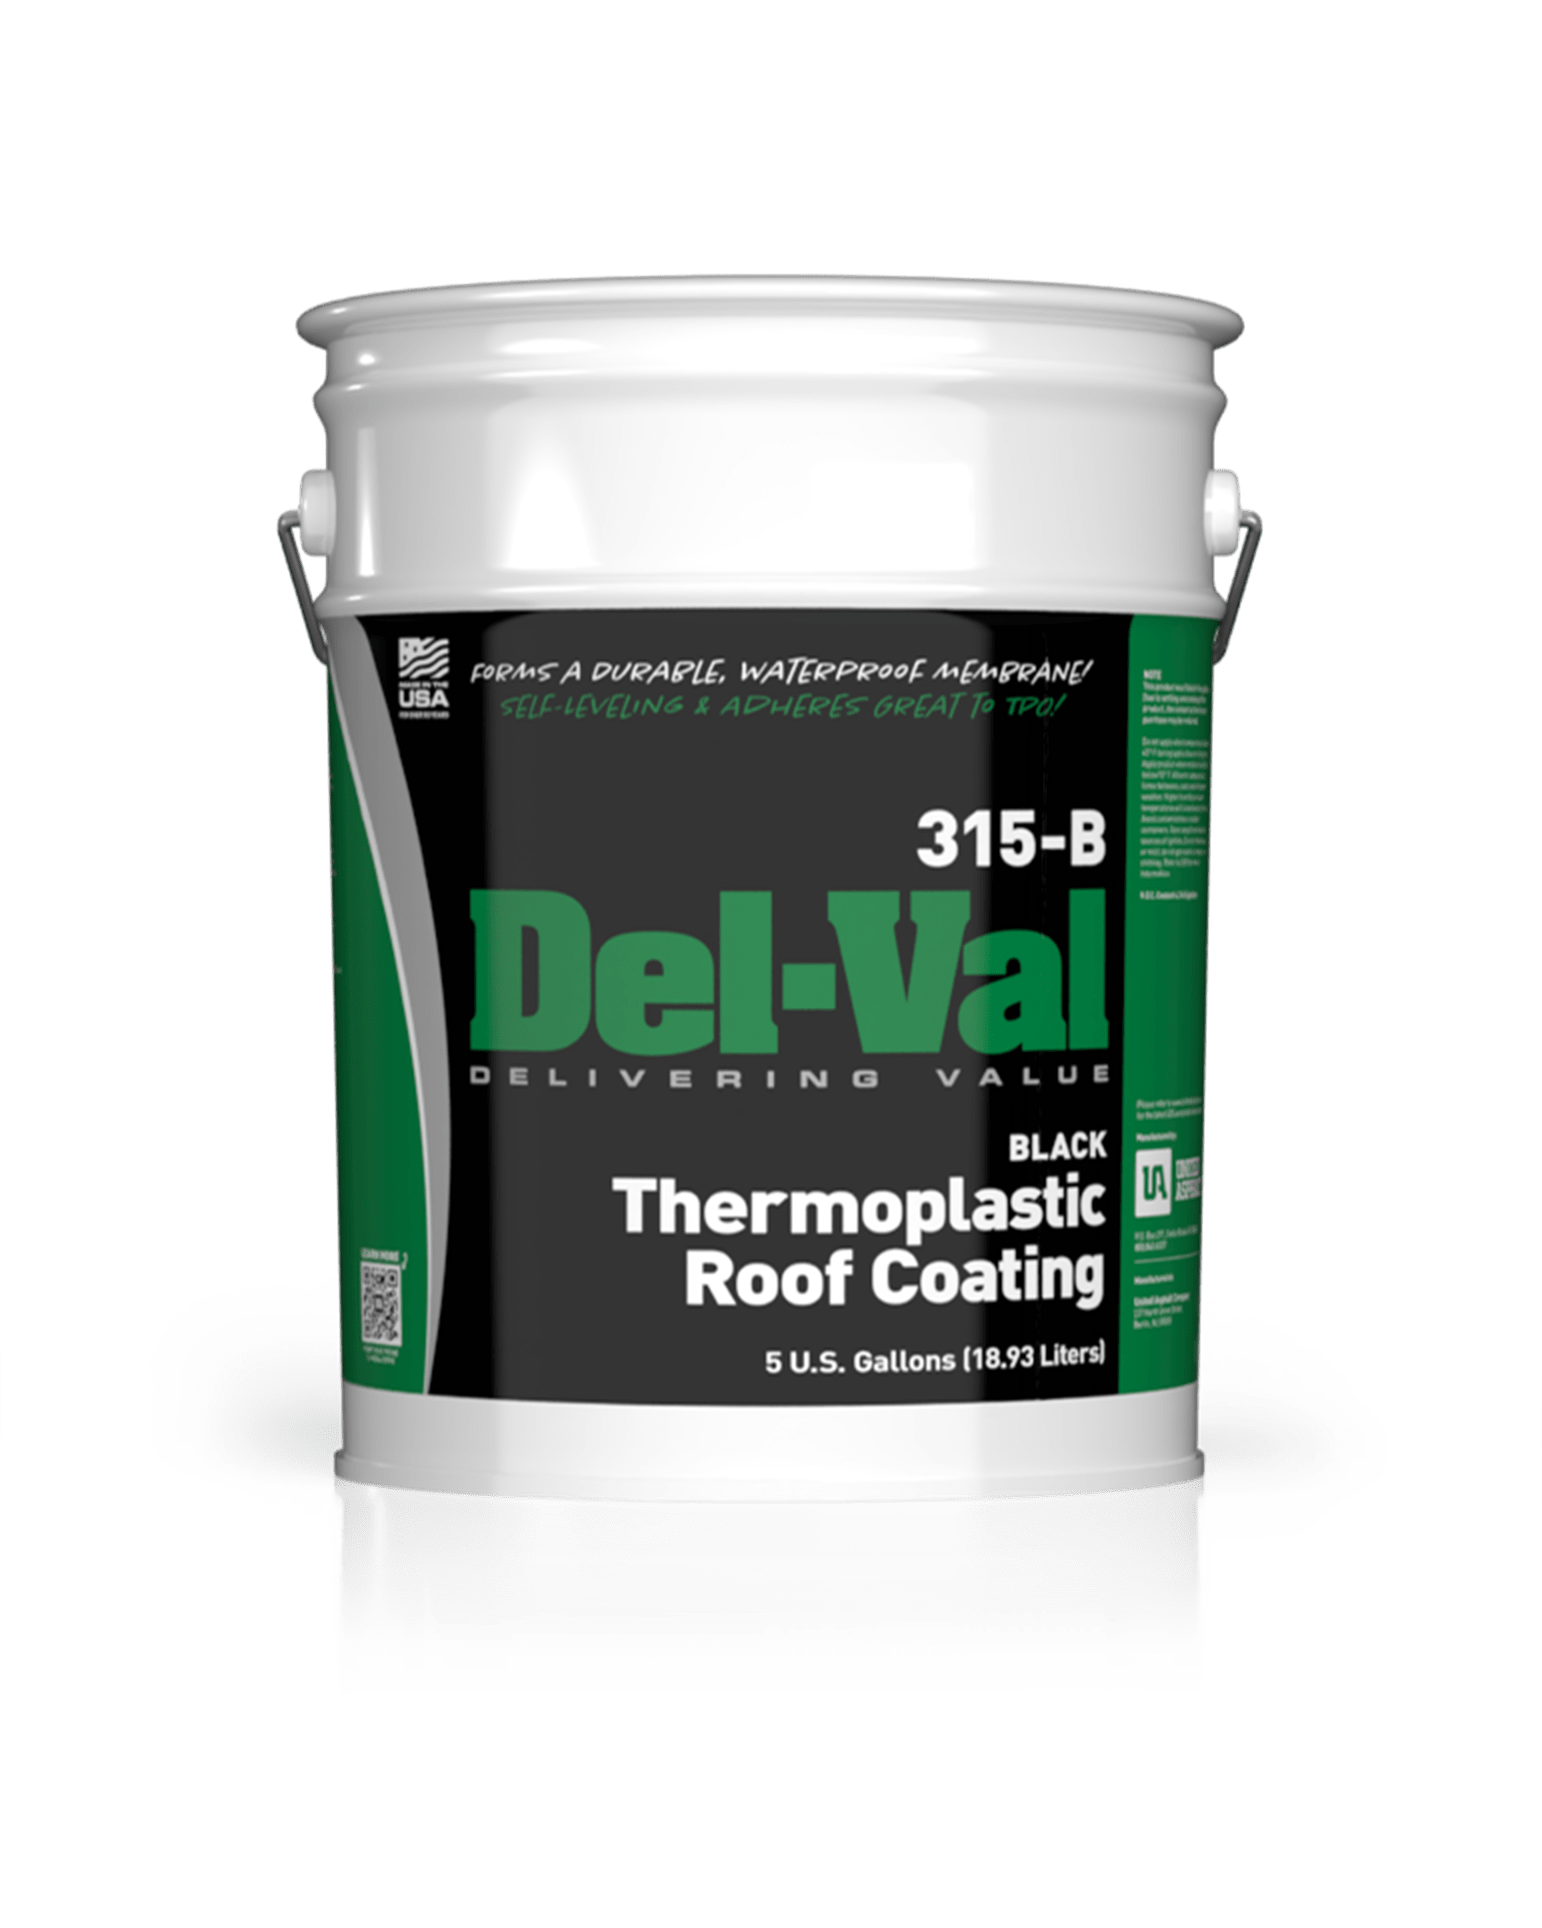 Del-Val 315-B Thermoplastic Roof Coating in Black in 5 Gallon Pail